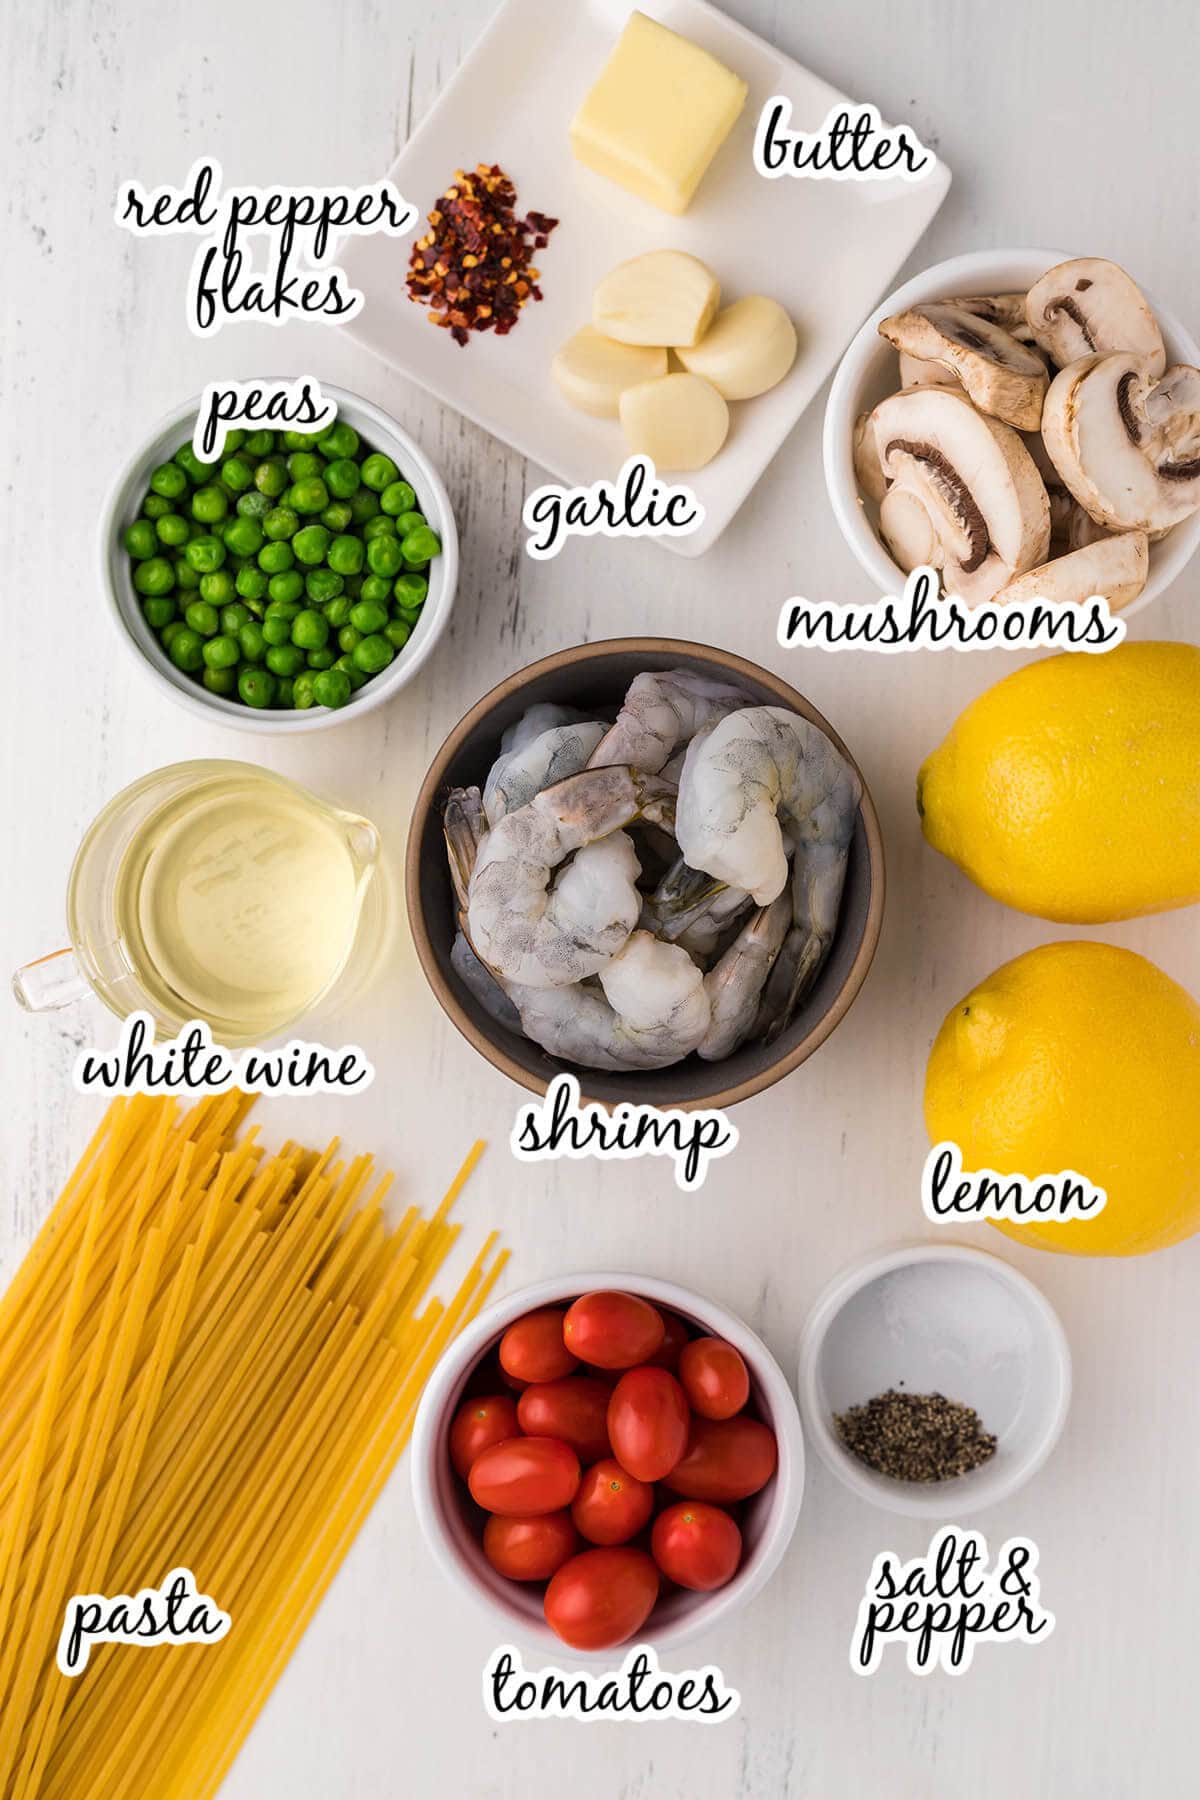 Ingredients for pasta recipe. With print overlay.